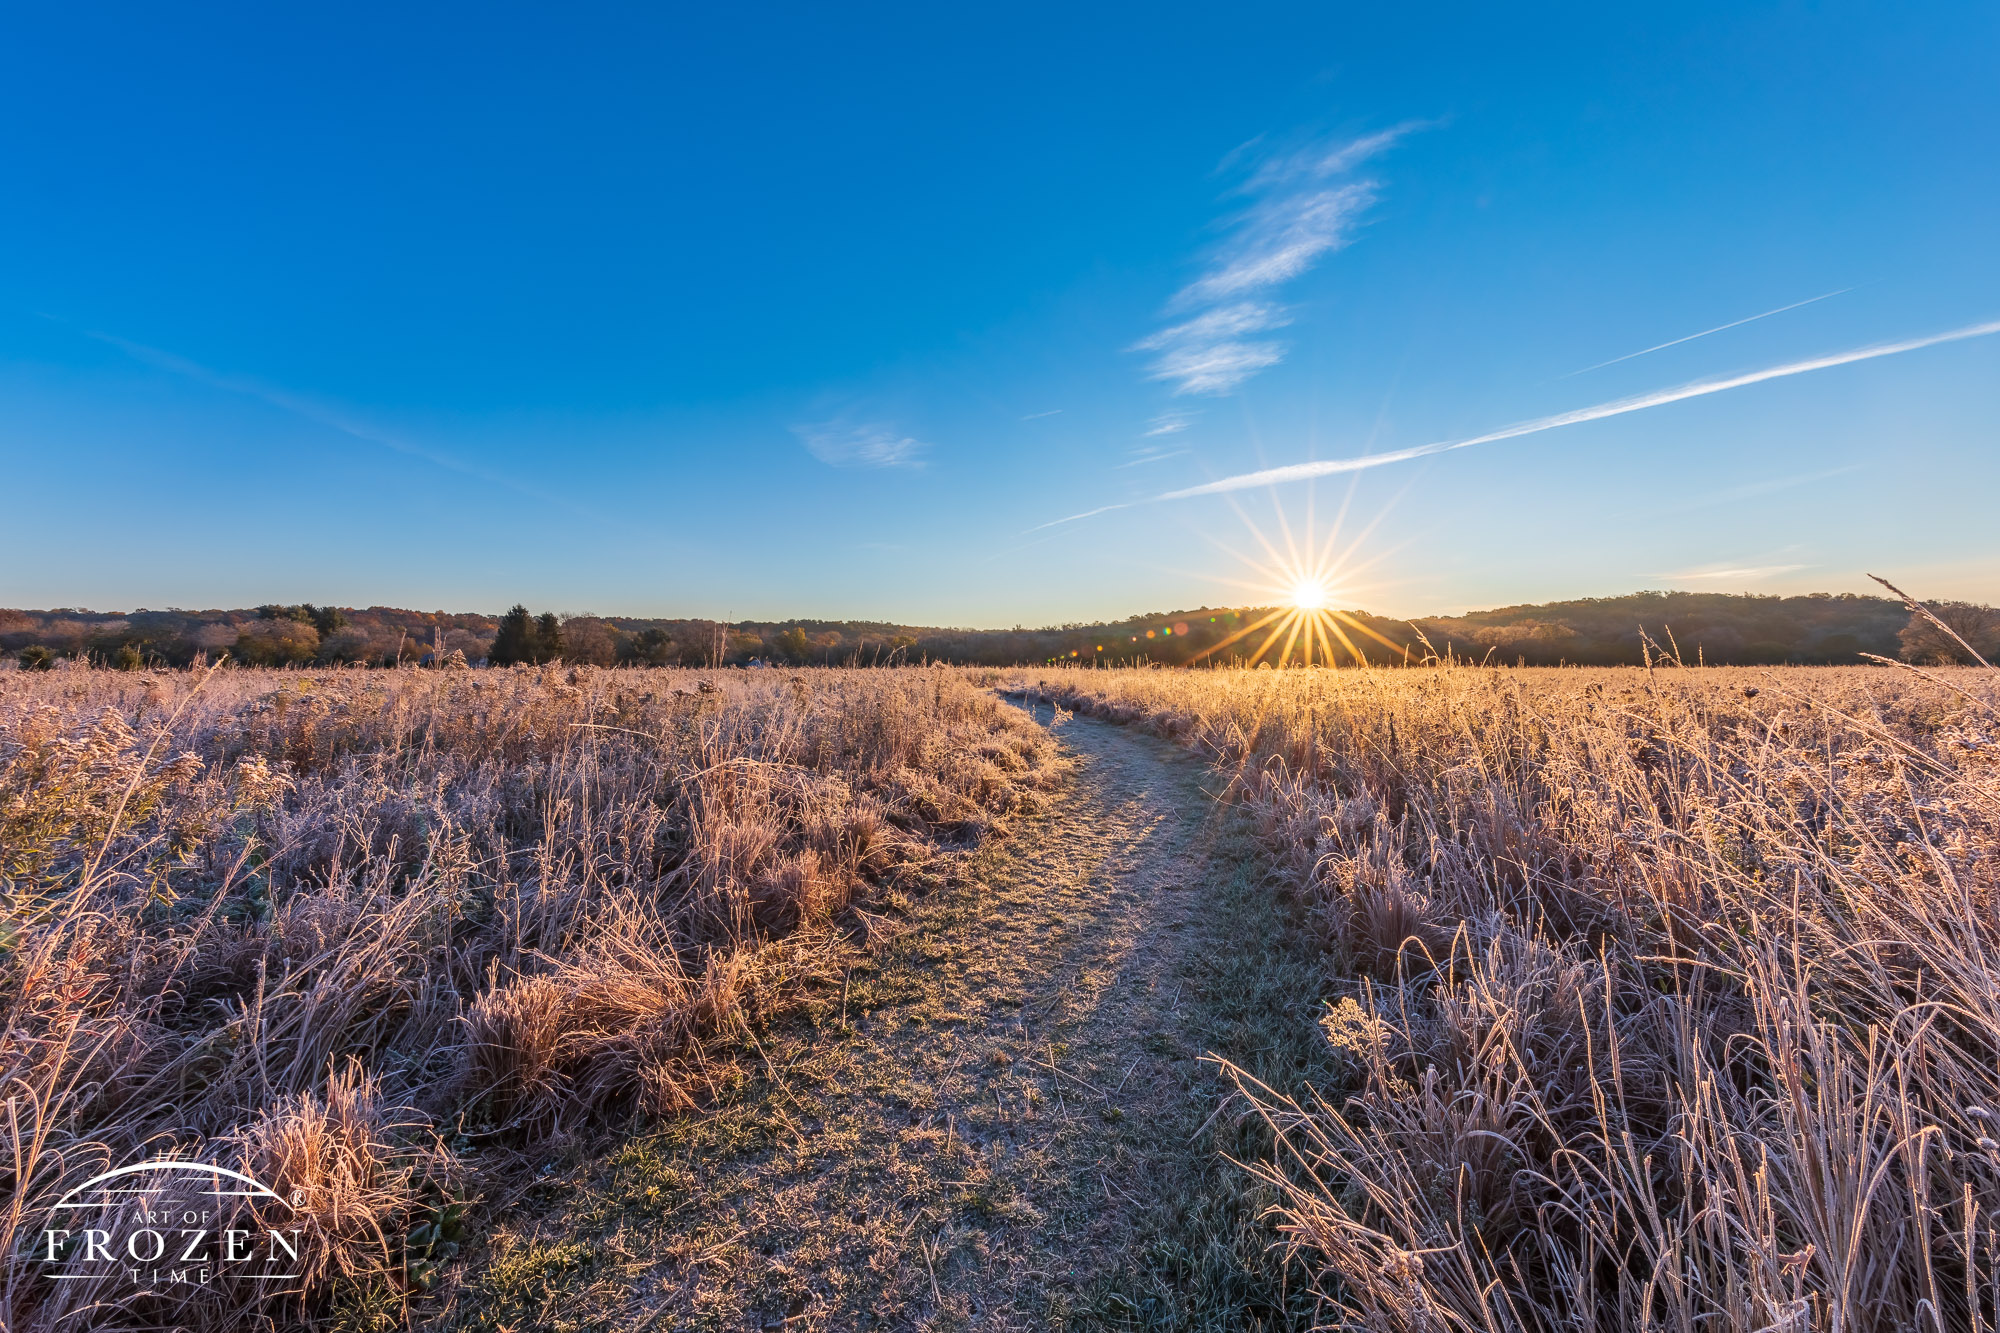 A heavily frosted tall grass prairie where a foot path leads the eye towards the sun just breaking the horizon